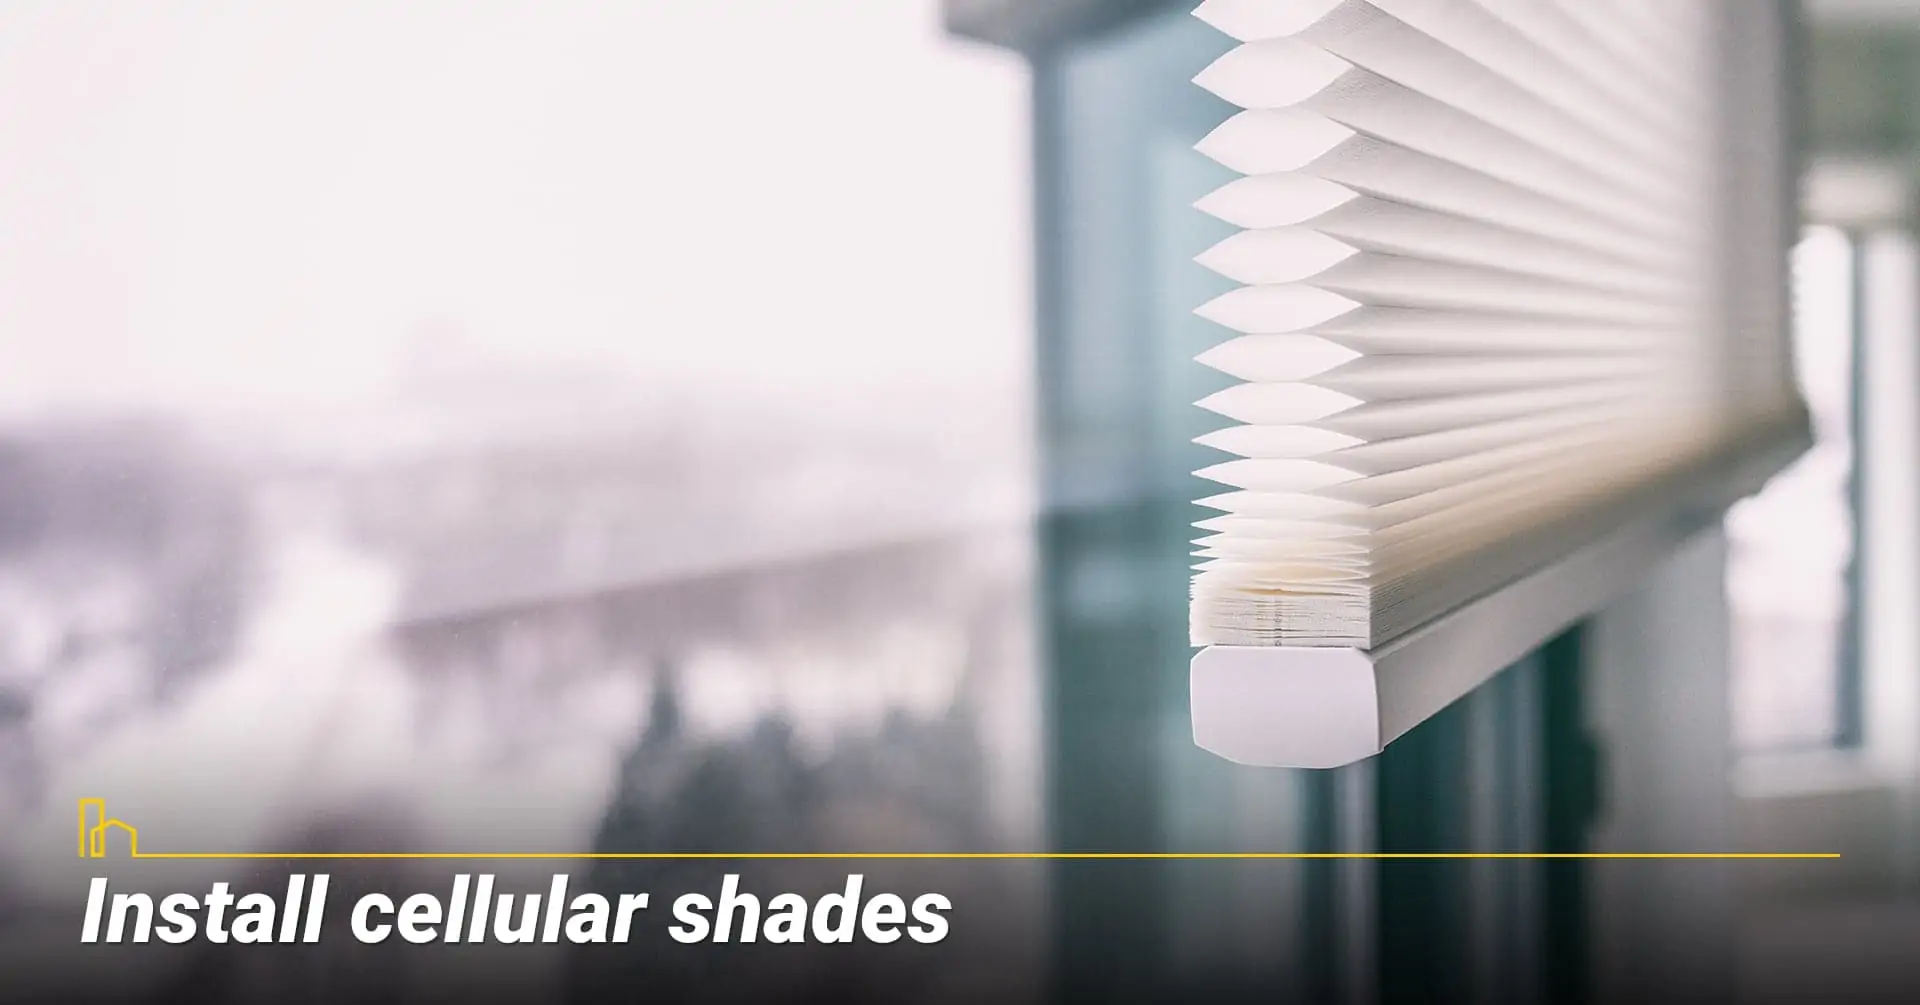 Install cellular shades, use shades as barrier